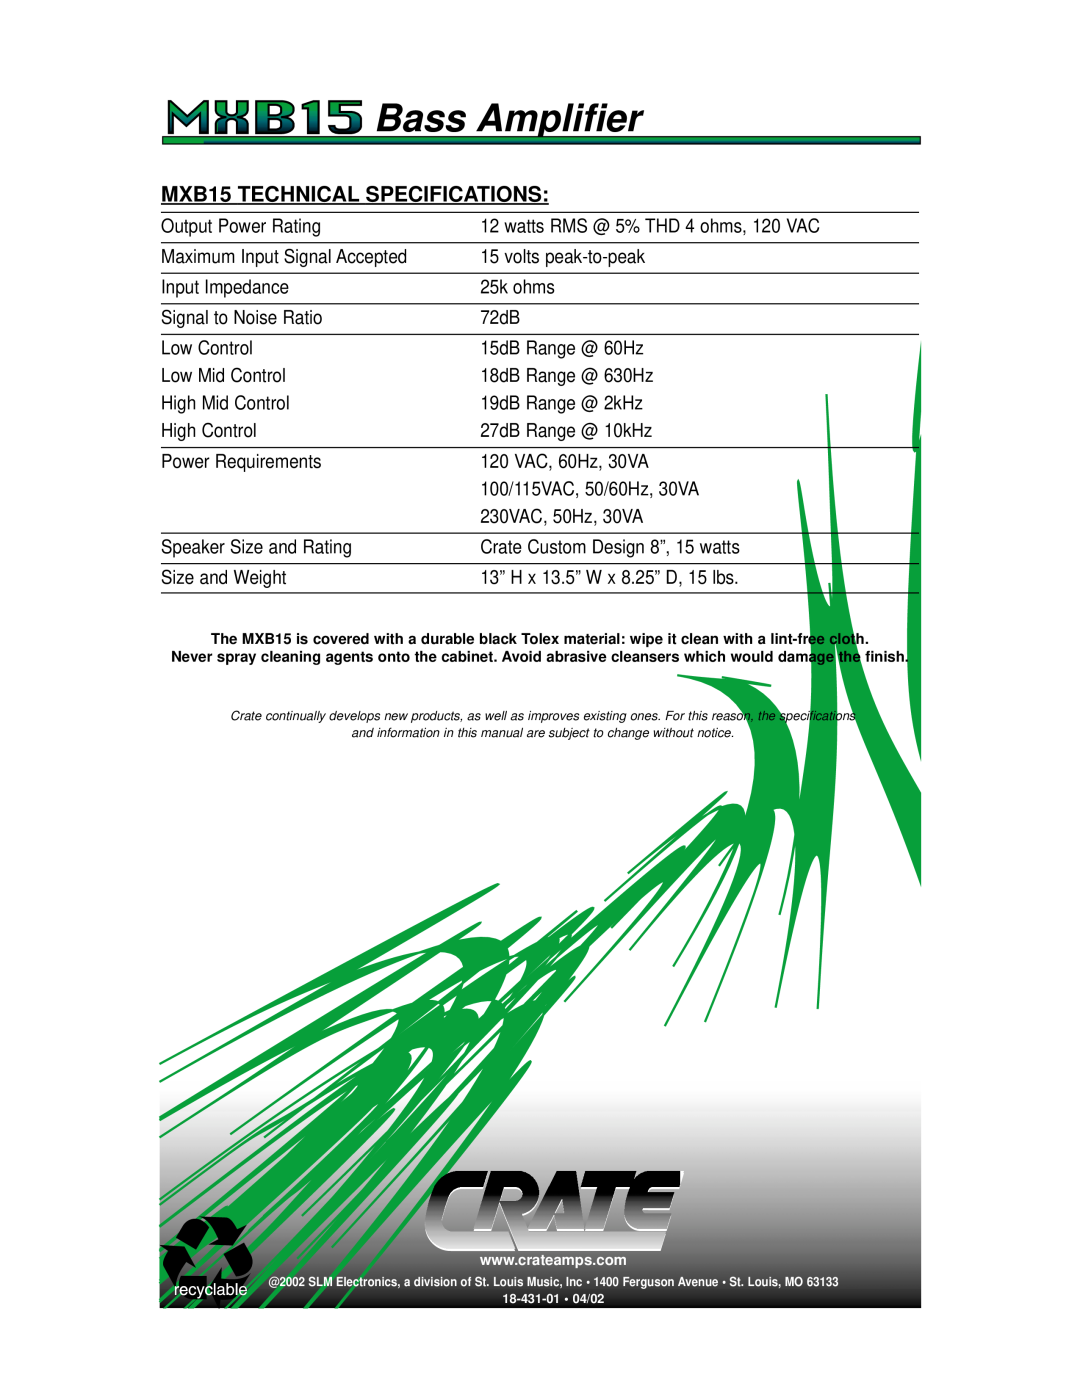 Crate Amplifiers manual MXB15 TECHNICAL SPECIFICATIONS, Bass Amplifier 